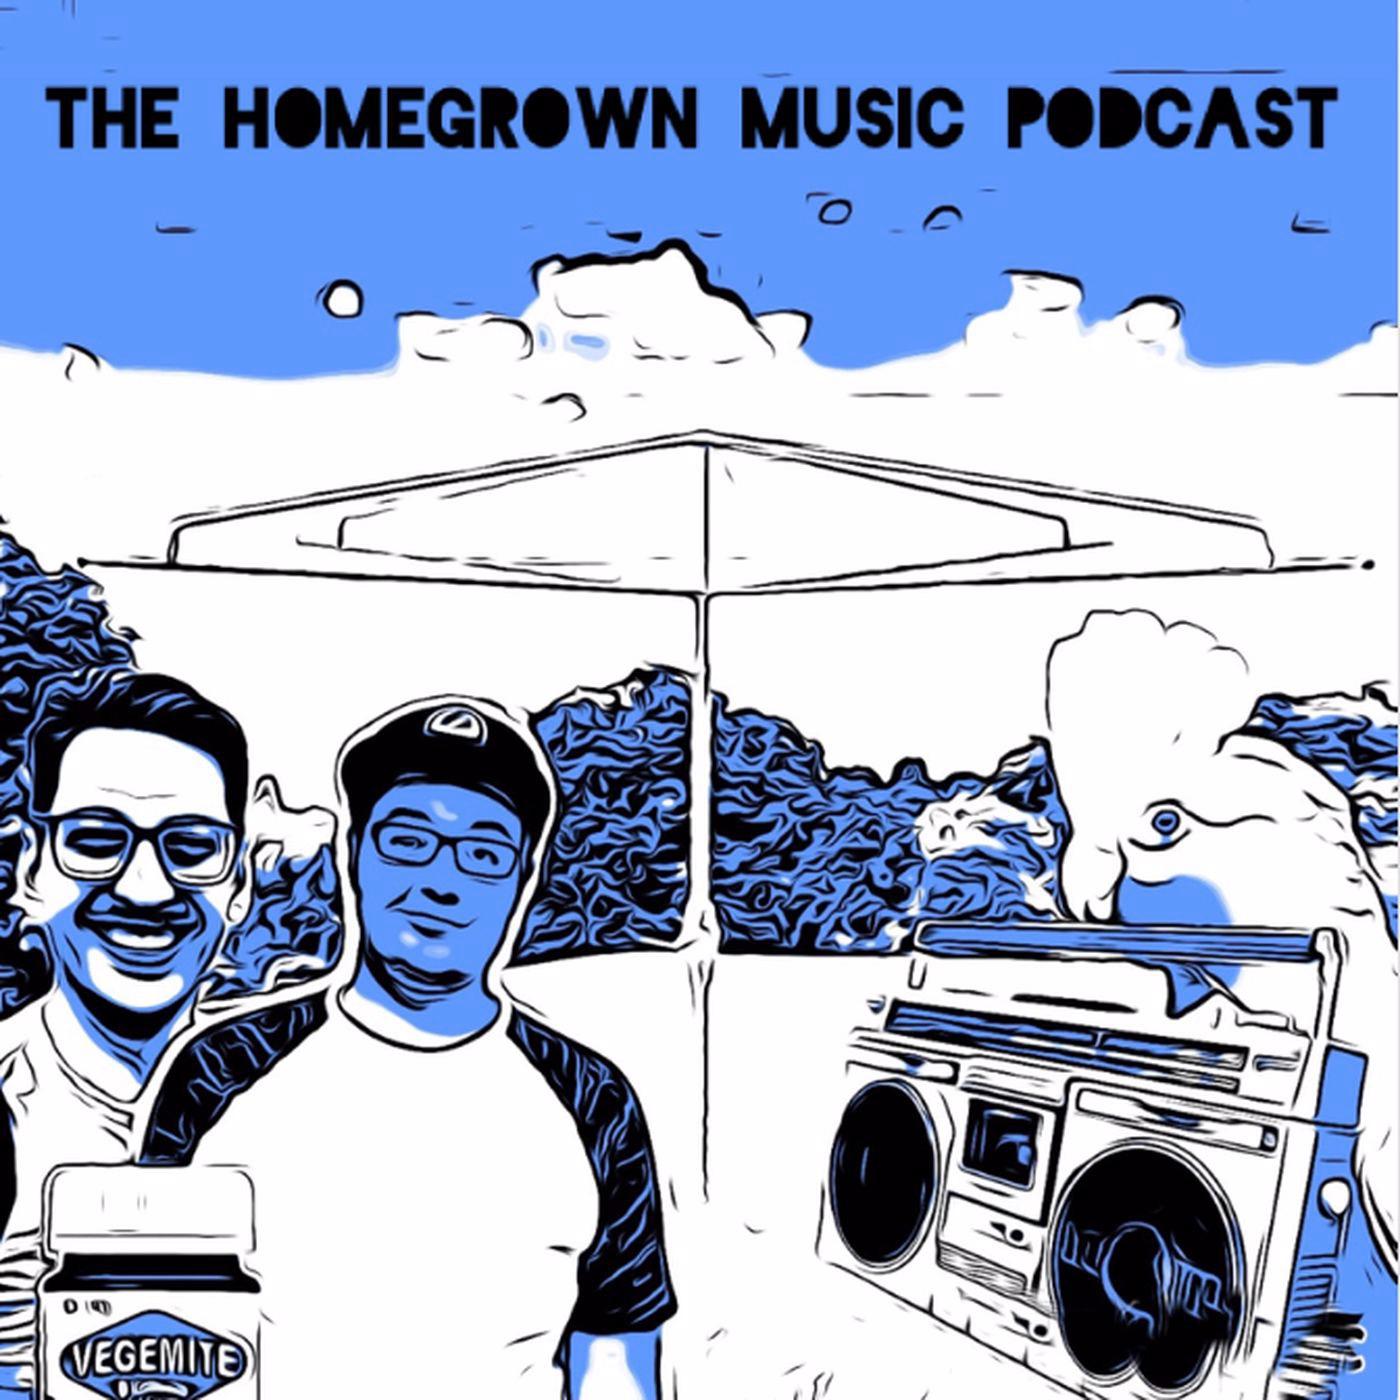 The Homegrown Music Podcast